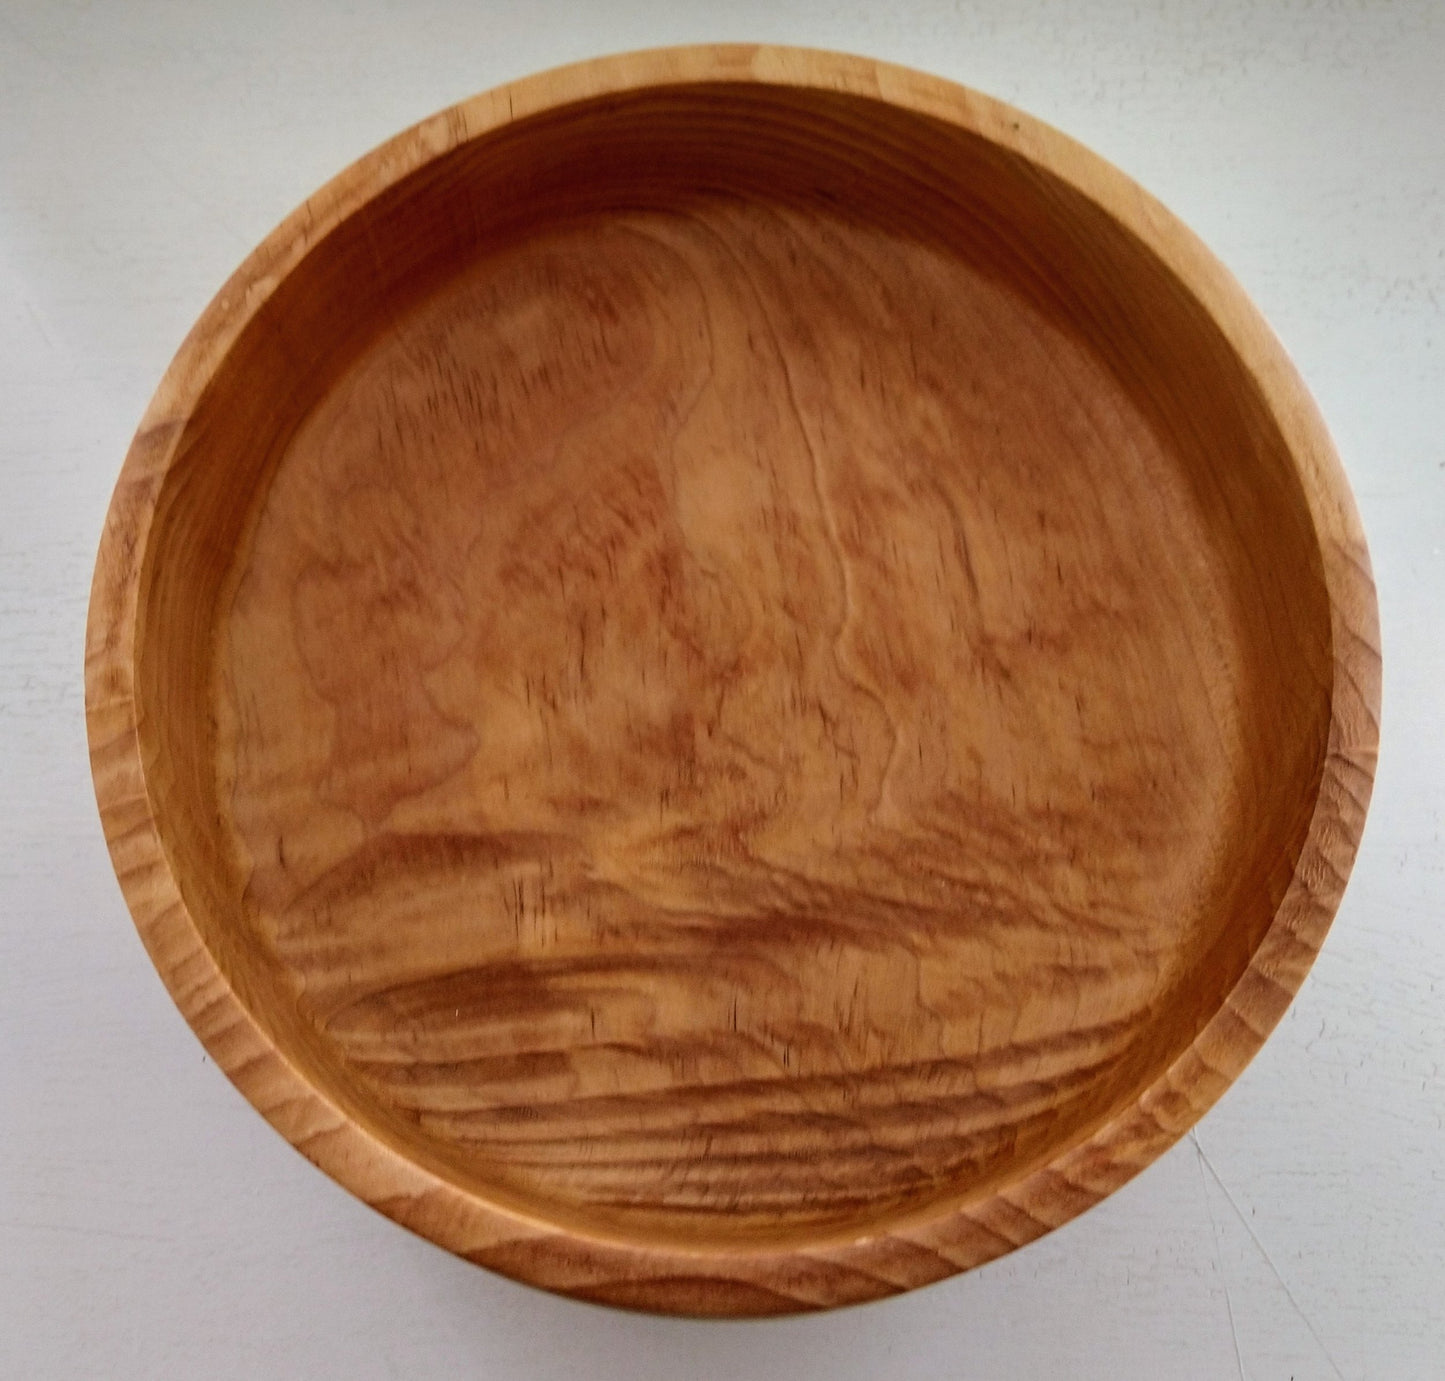 Andy Harris- Turned Wooden Bowl